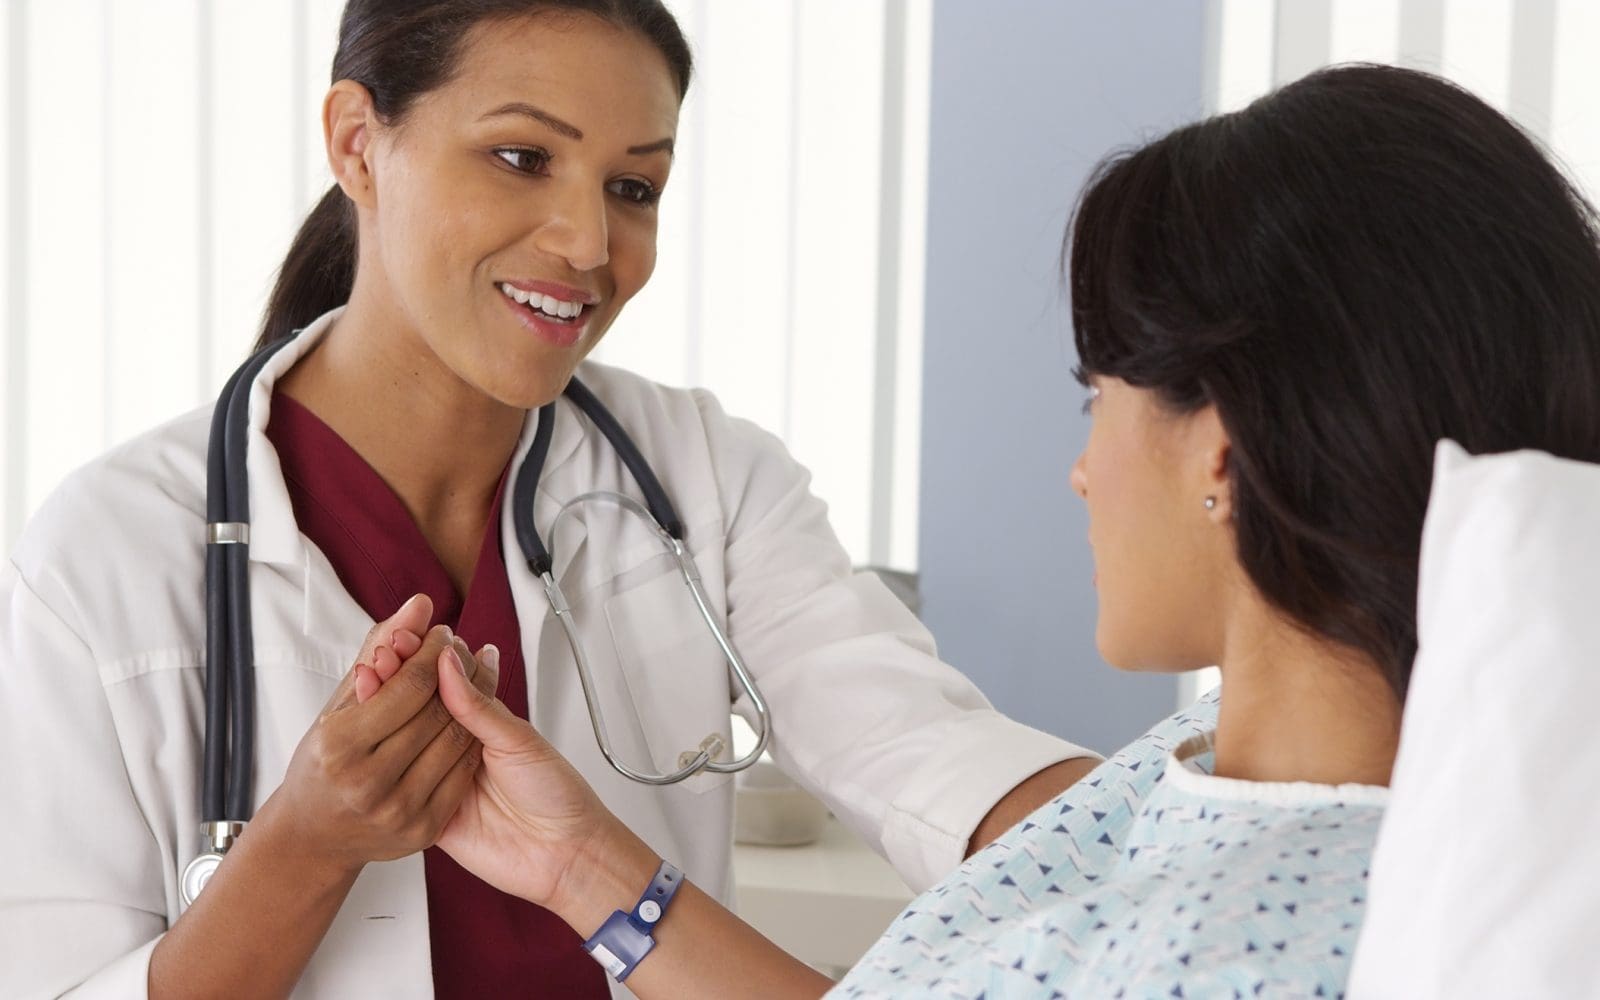 How Informed Are You With Healthcare Marketing To The Hispanic Market?